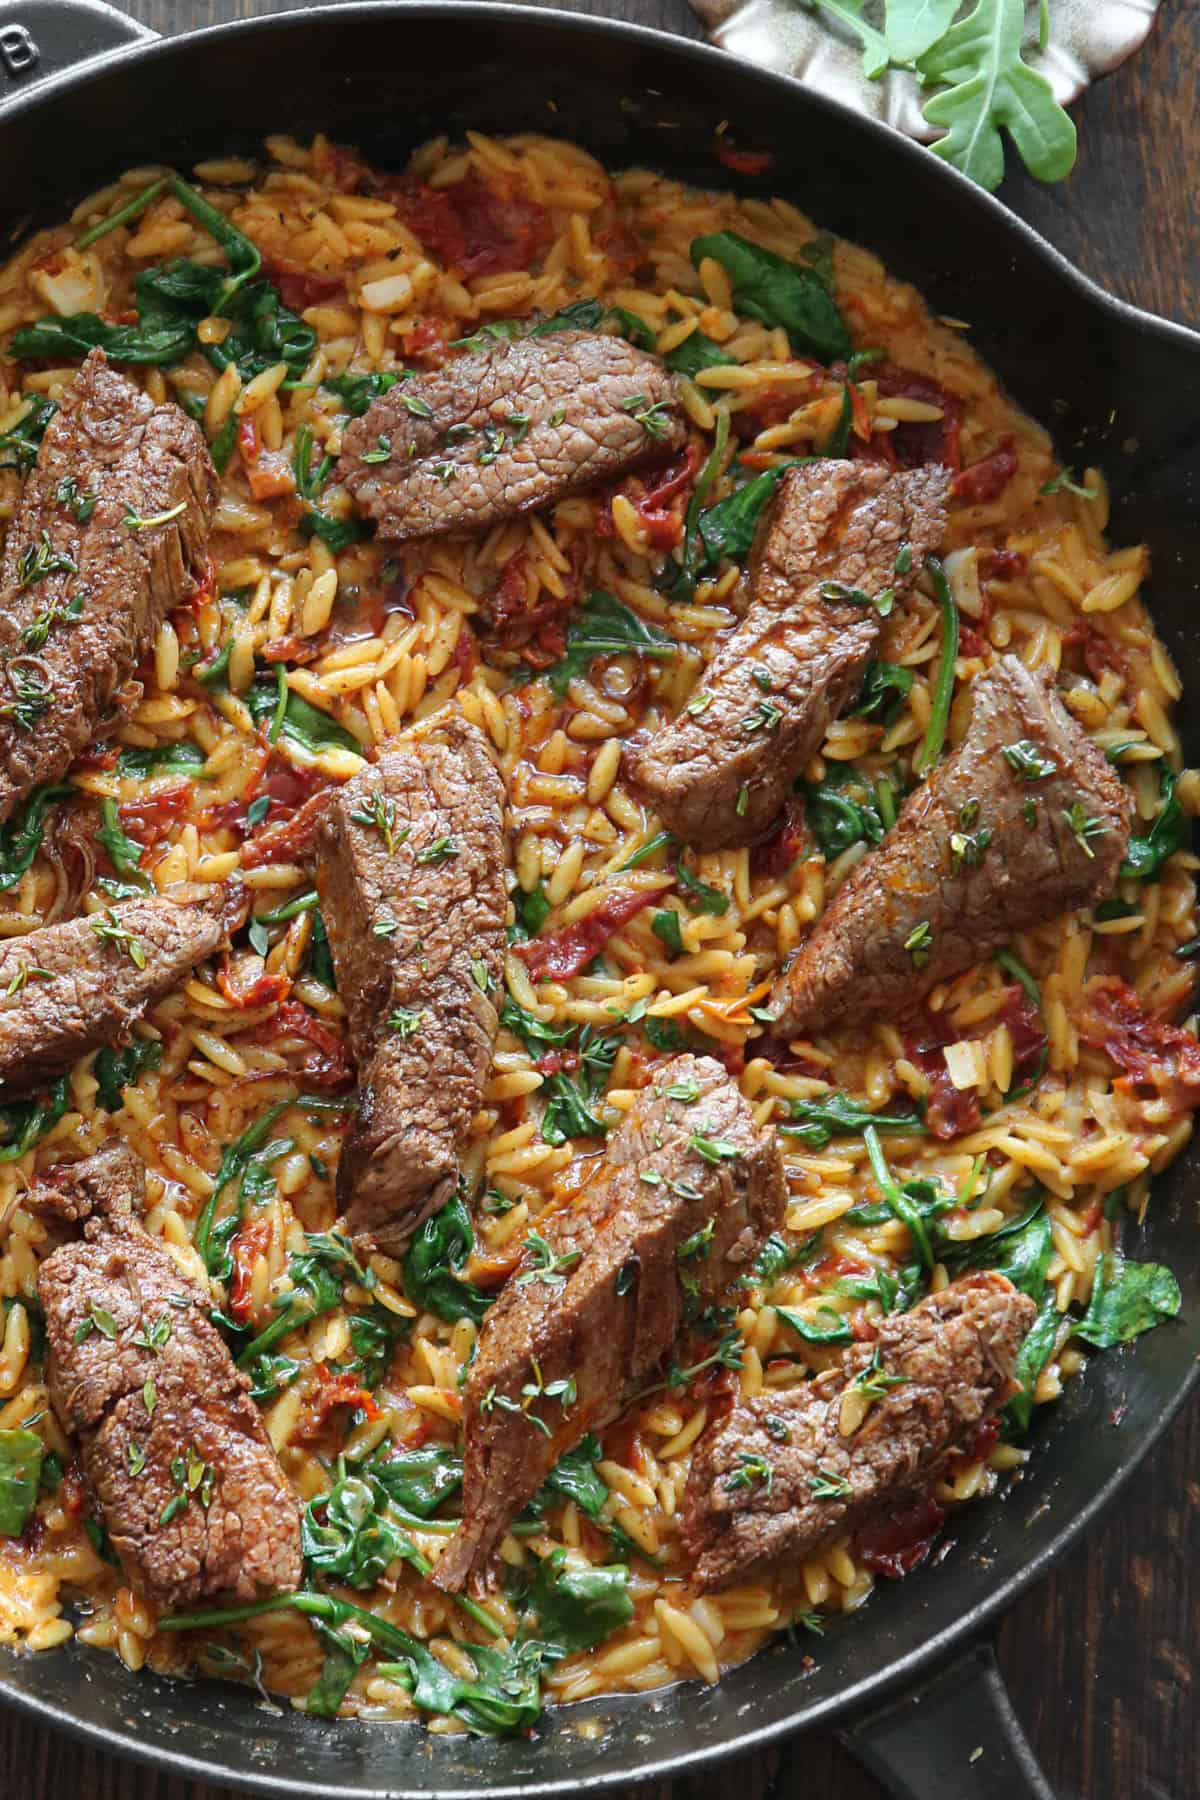 Pan-Seared Flank Steak (sliced) with Creamy Orzo, Spinach, and Sun-Dried Tomatoes - in a cast iron skillet.